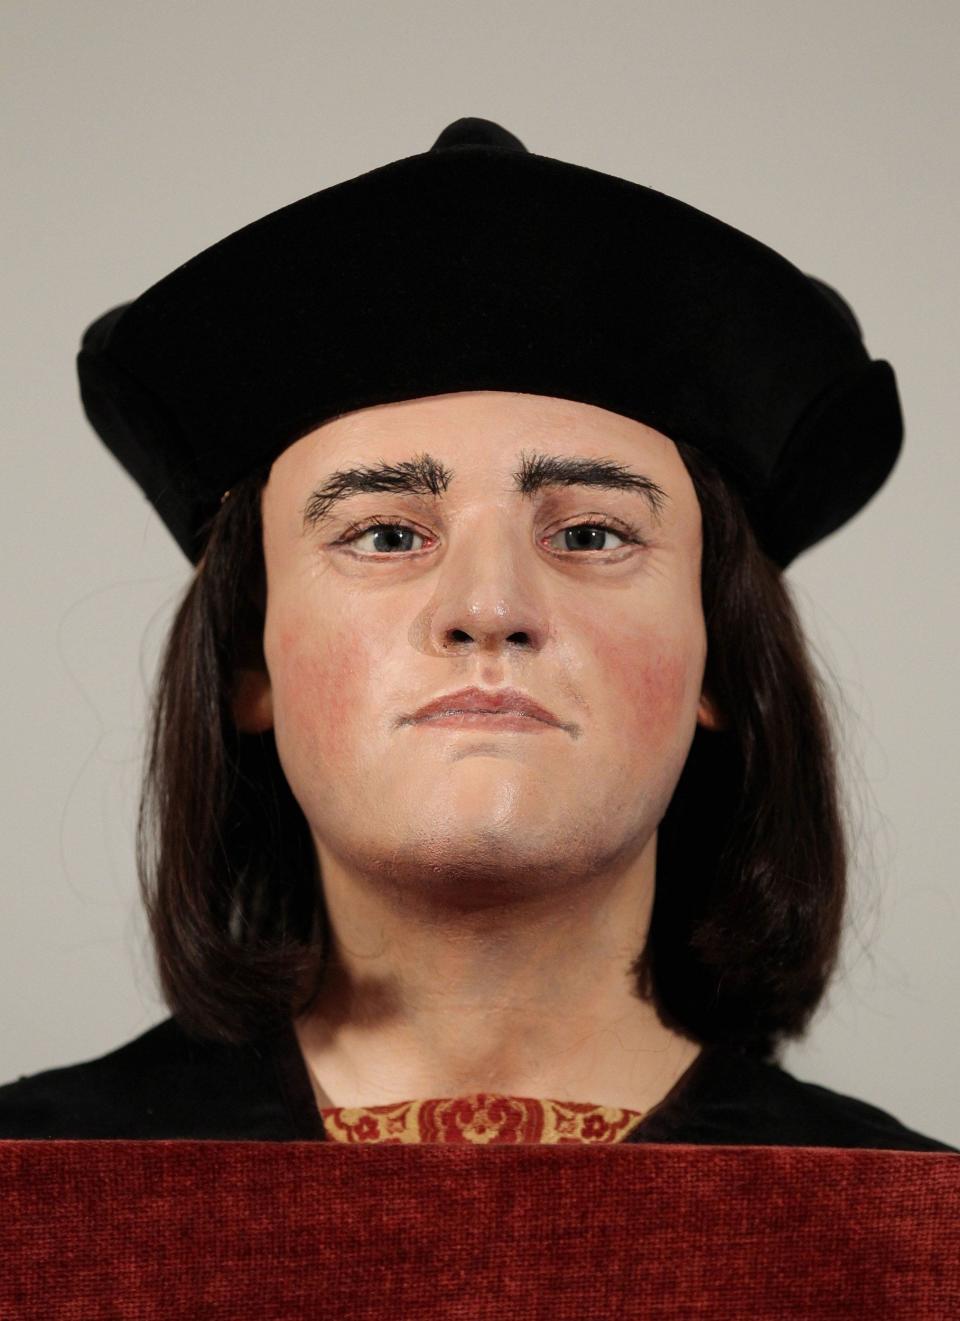 The face of Richard III at the Society of Antiquaries in London - Gareth Fuller/PA Wire